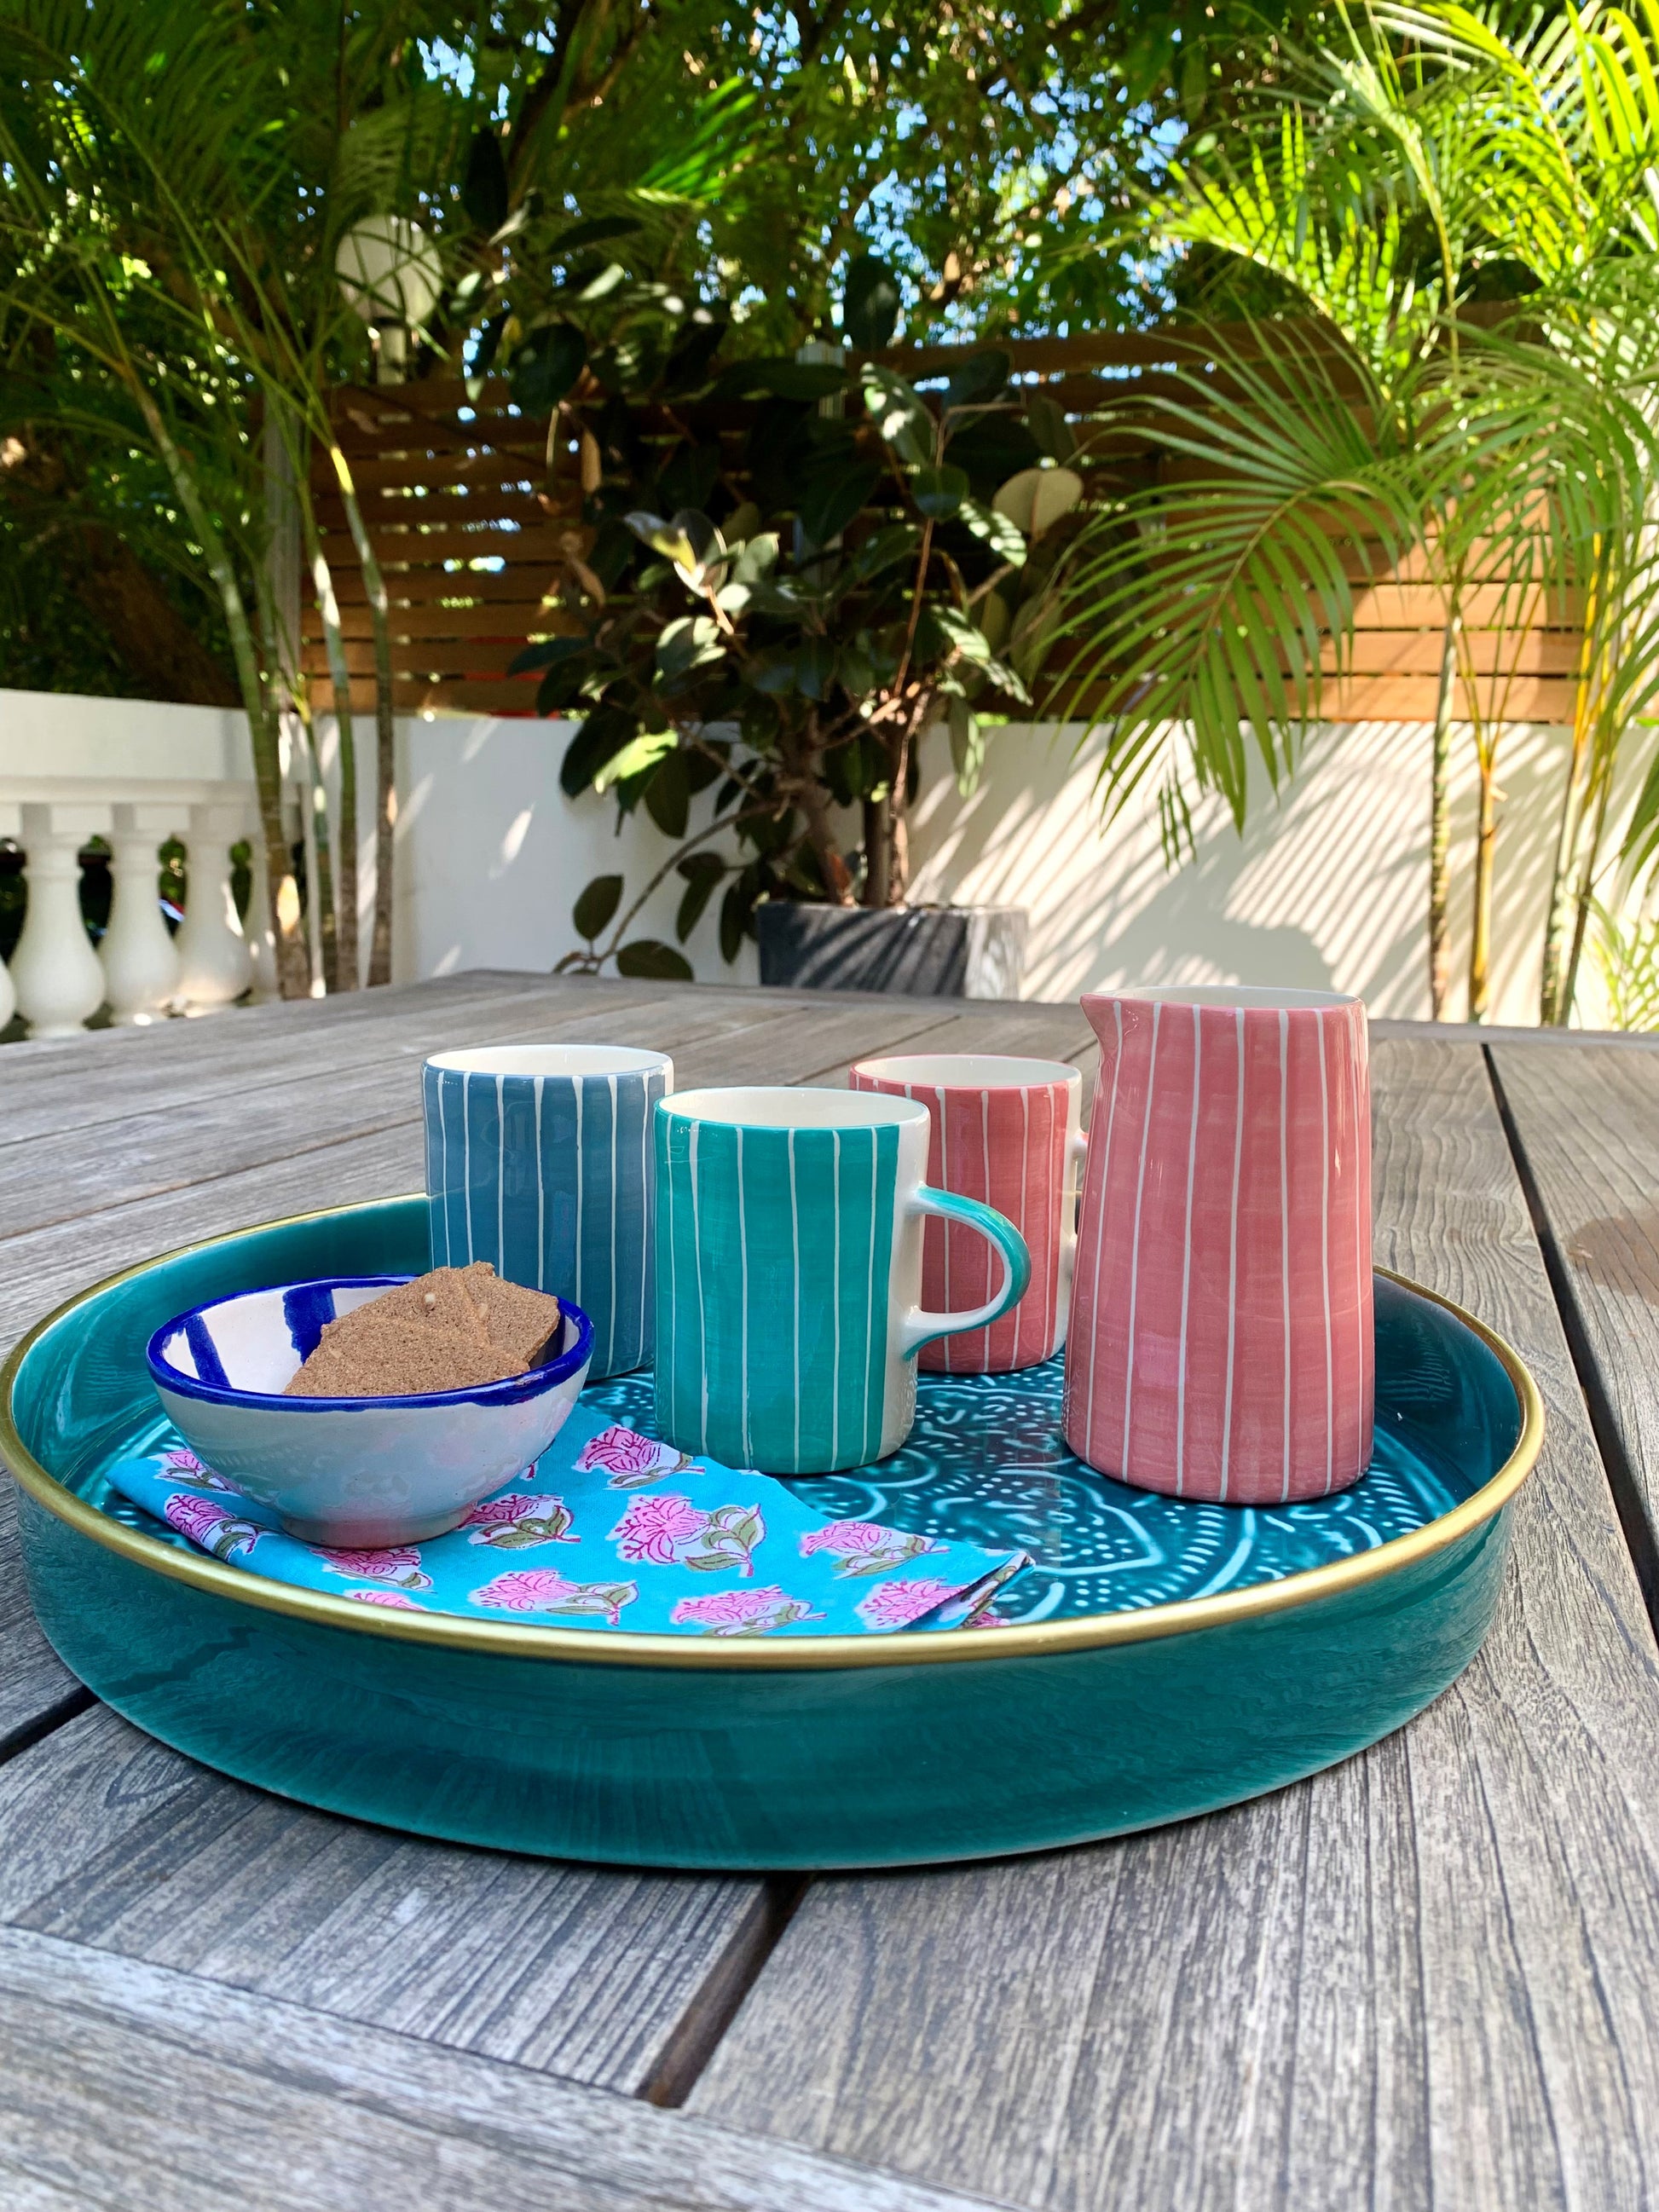 Three hand-painted mugs in grey, pink and mint green on a tray with a milk jug and biscuits. The tray is on a garden table.